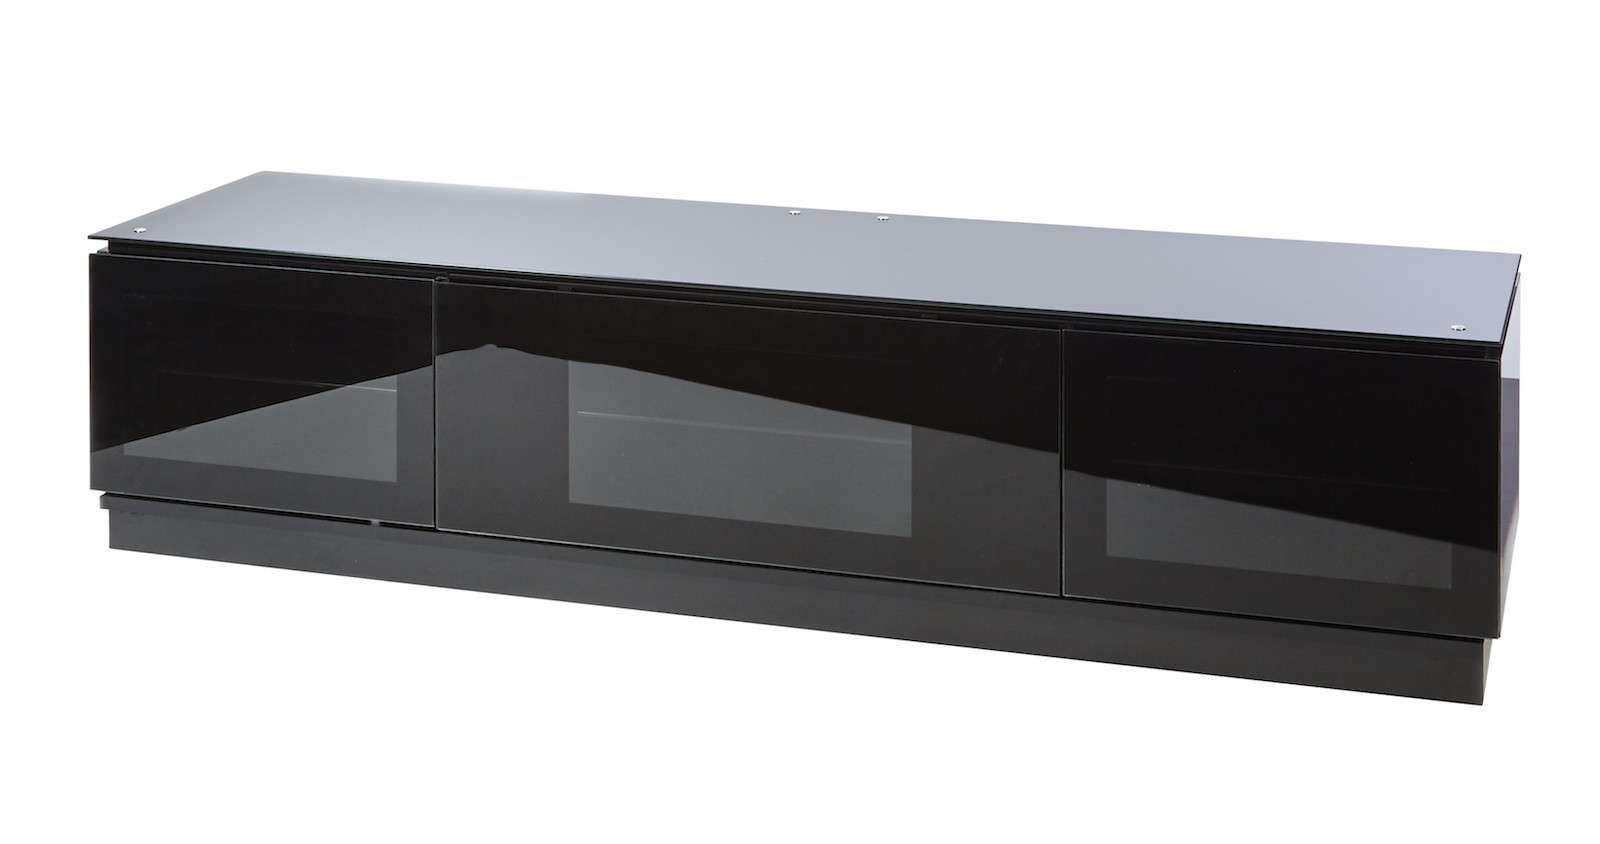 Black Gloss Tv Unit Up To 80 Inch Flat Screen Tv | Mmt D1800 In Black Gloss Tv Cabinets (View 1 of 20)